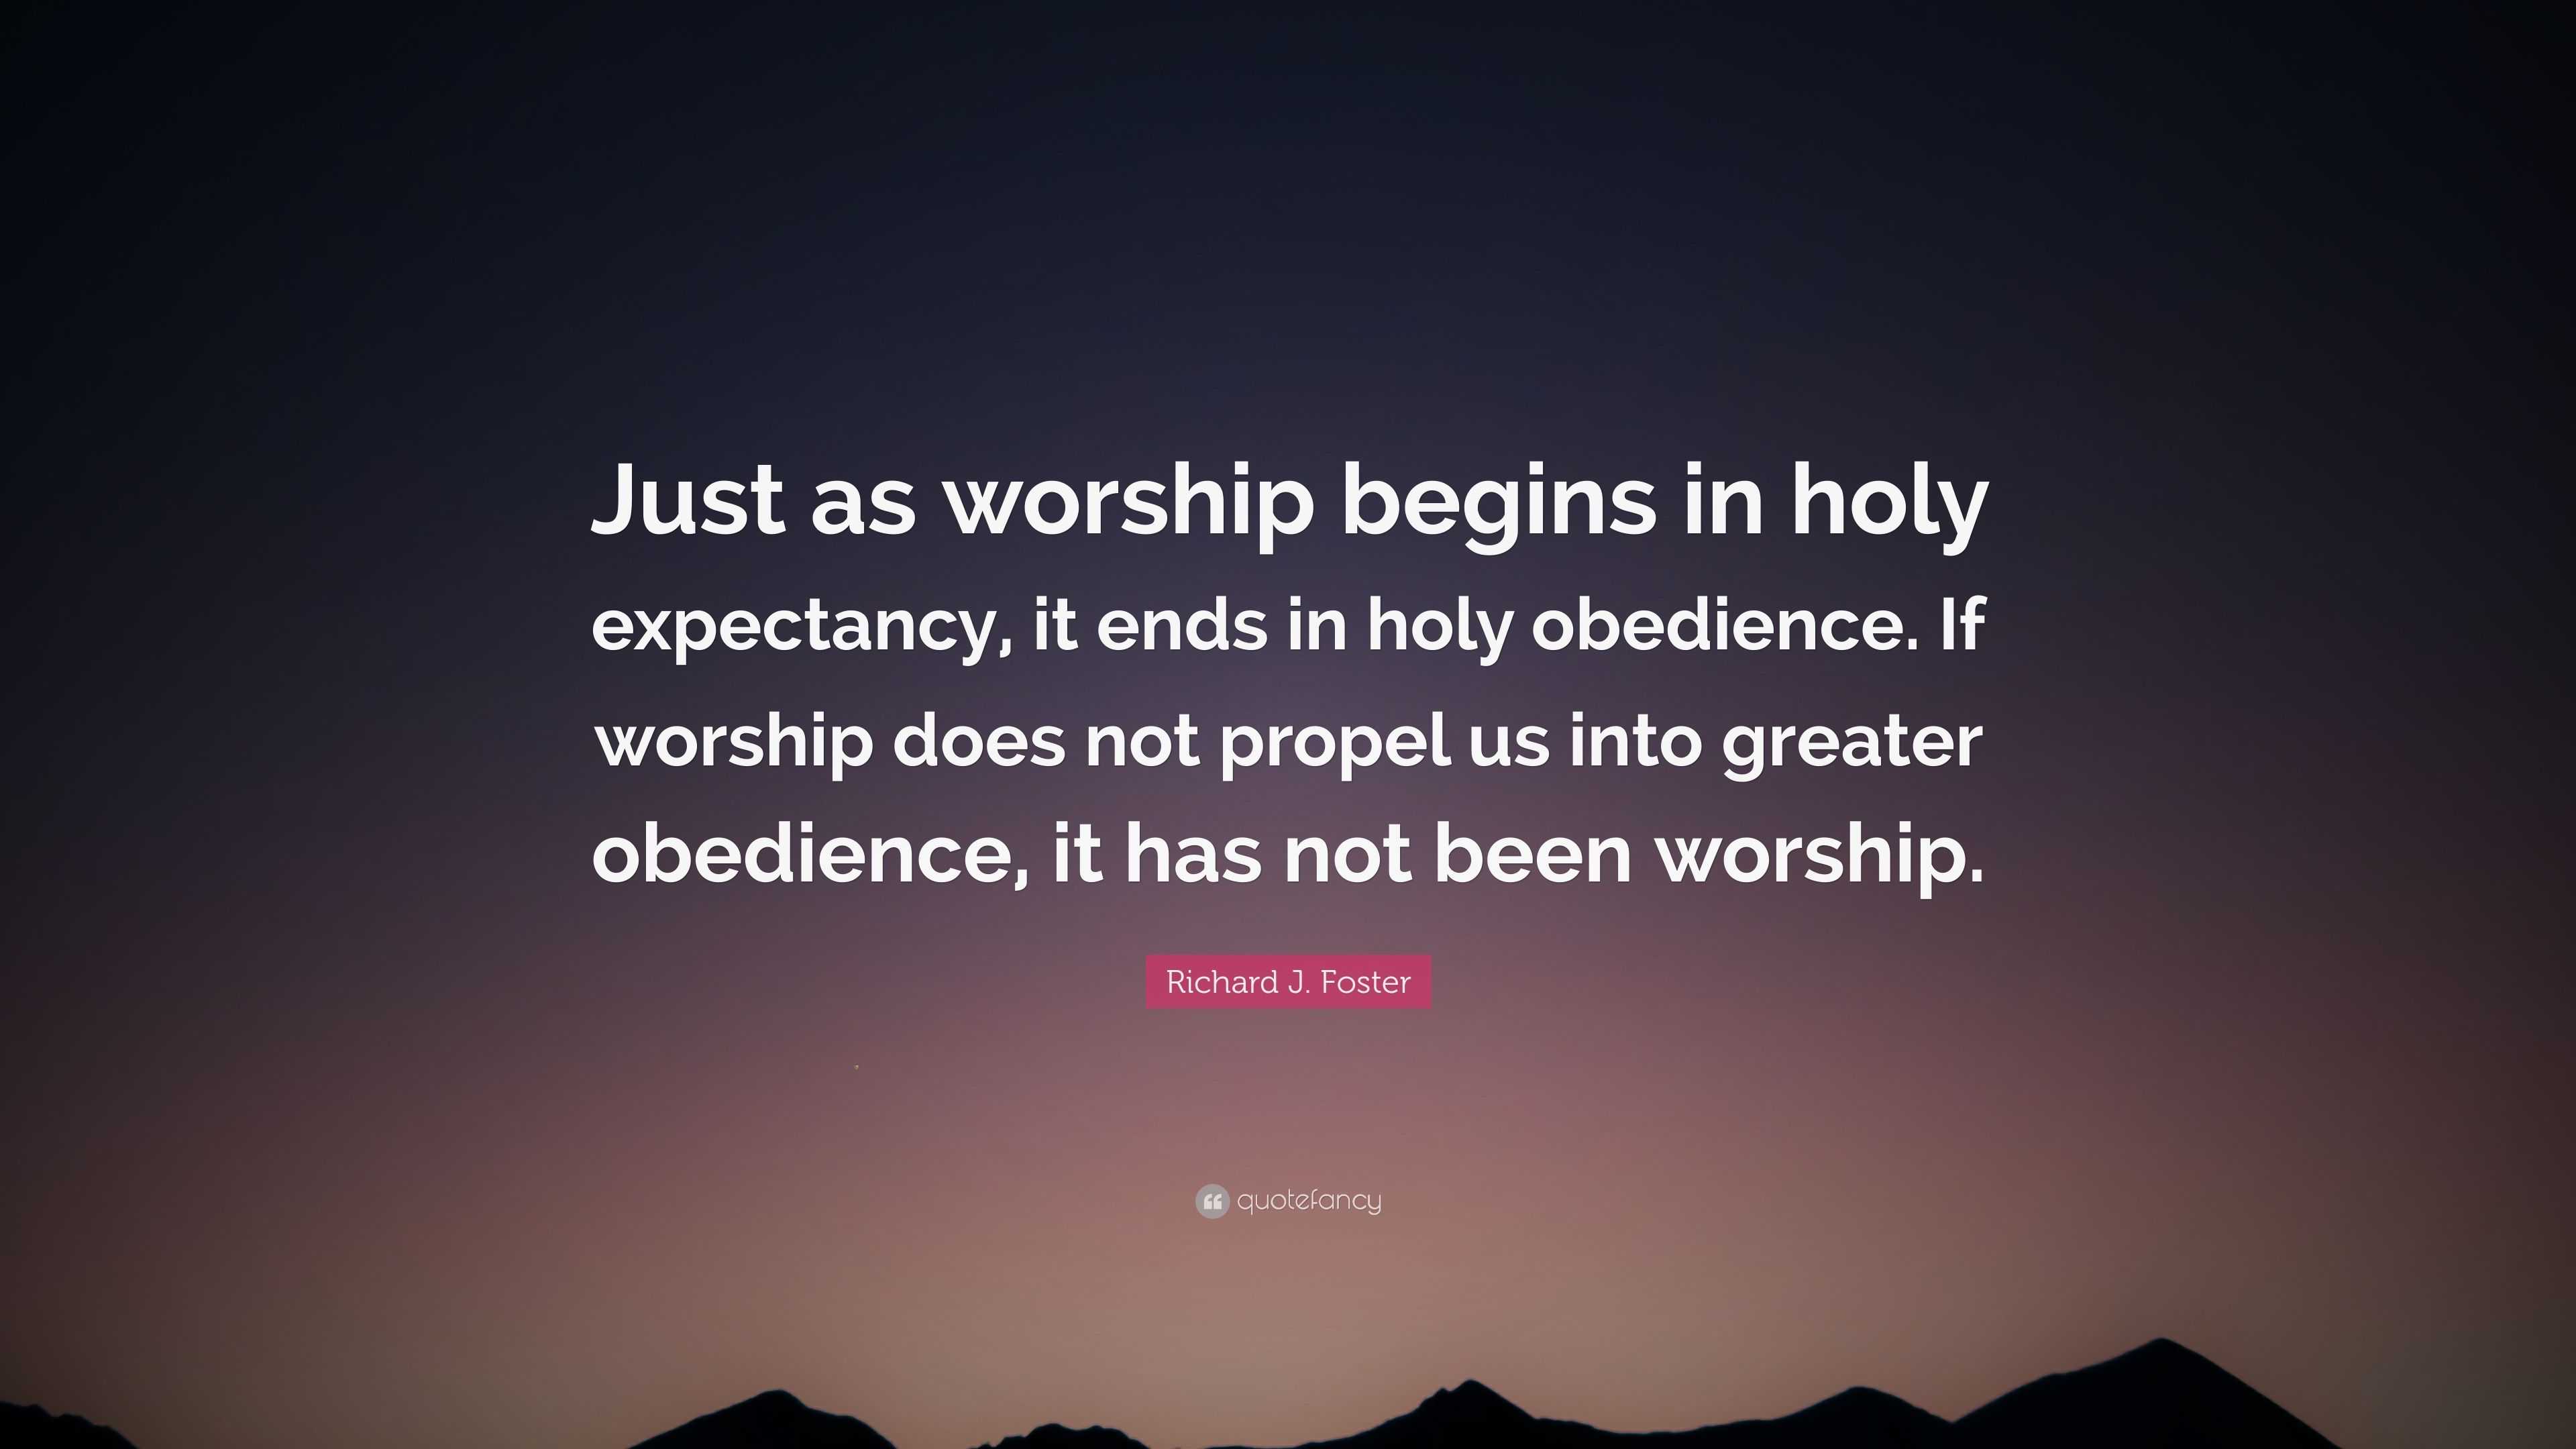 Richard J. Foster Quote: “Just as worship begins in holy expectancy, it ...